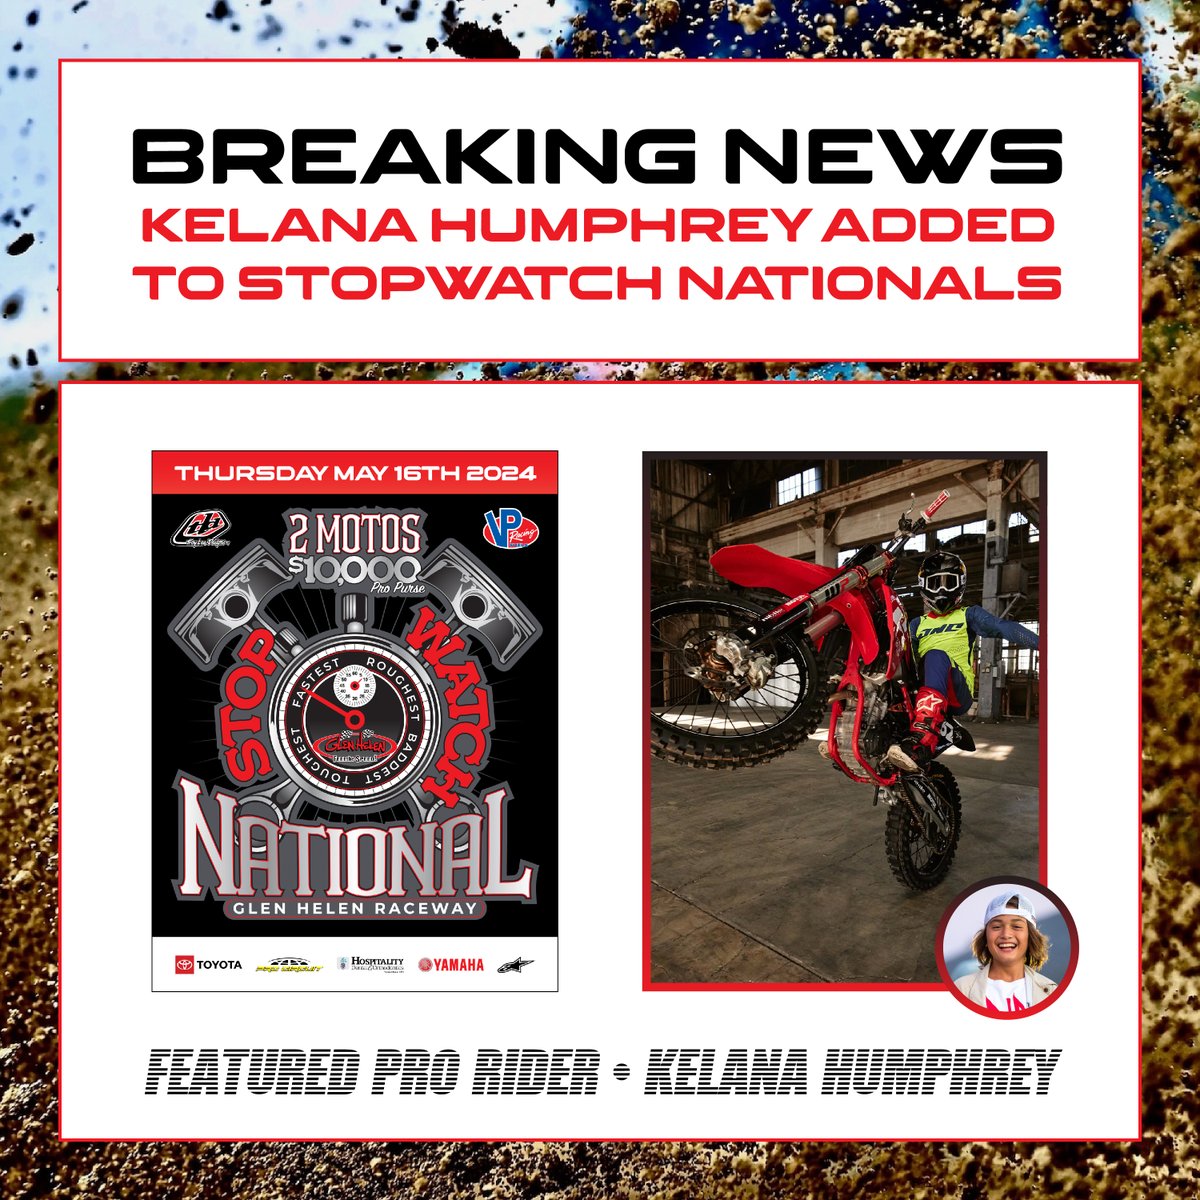 🚀 Gear up race fans, @kelana_humphrey is pulling up to join the action at the Stopwatch National! Hailing from the stunning shores of Bali and now a full-time resident in the US, this 16-year-old... 🔥 Event Sponsors: @vpracingfuels @troyleedesigns // #StopwatchNational